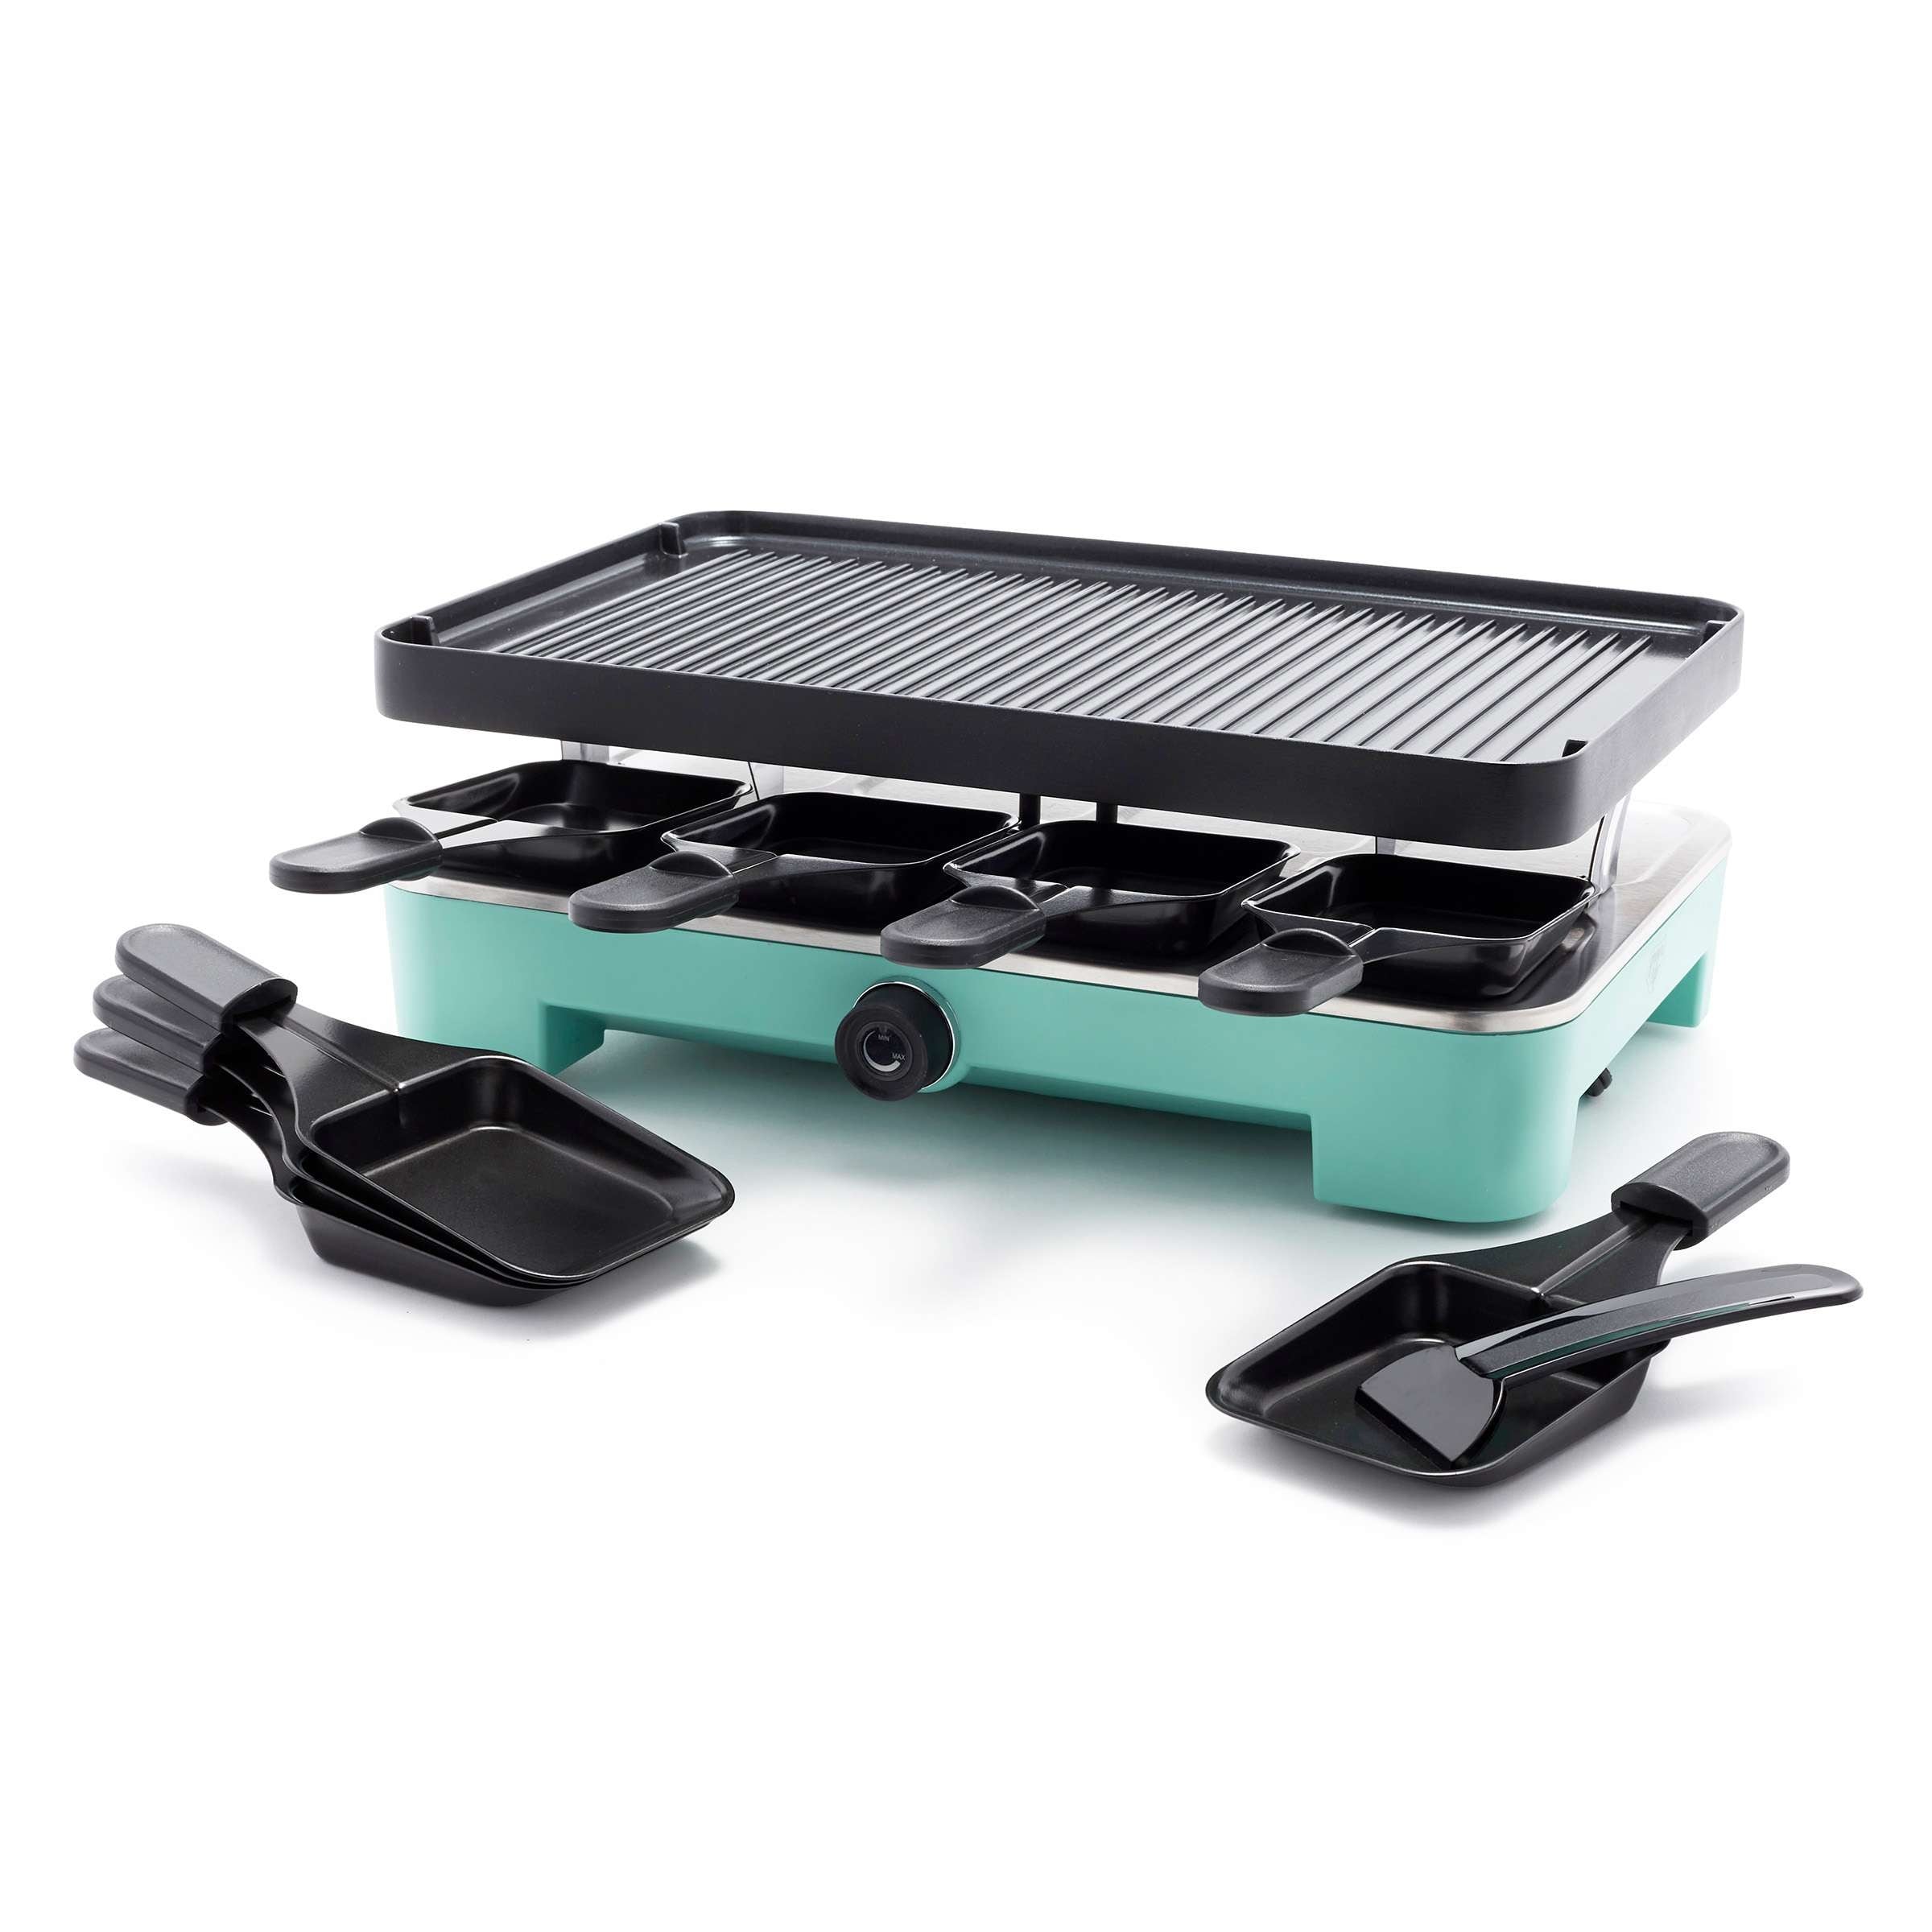 https://ak1.ostkcdn.com/images/products/is/images/direct/16c033206c637452da9ada9a897ee3466efcf1a3/GreenLife-Raclette-Indoor-Tabletop-Grill%2C-2-in-1-Grill-and-Griddle.jpg